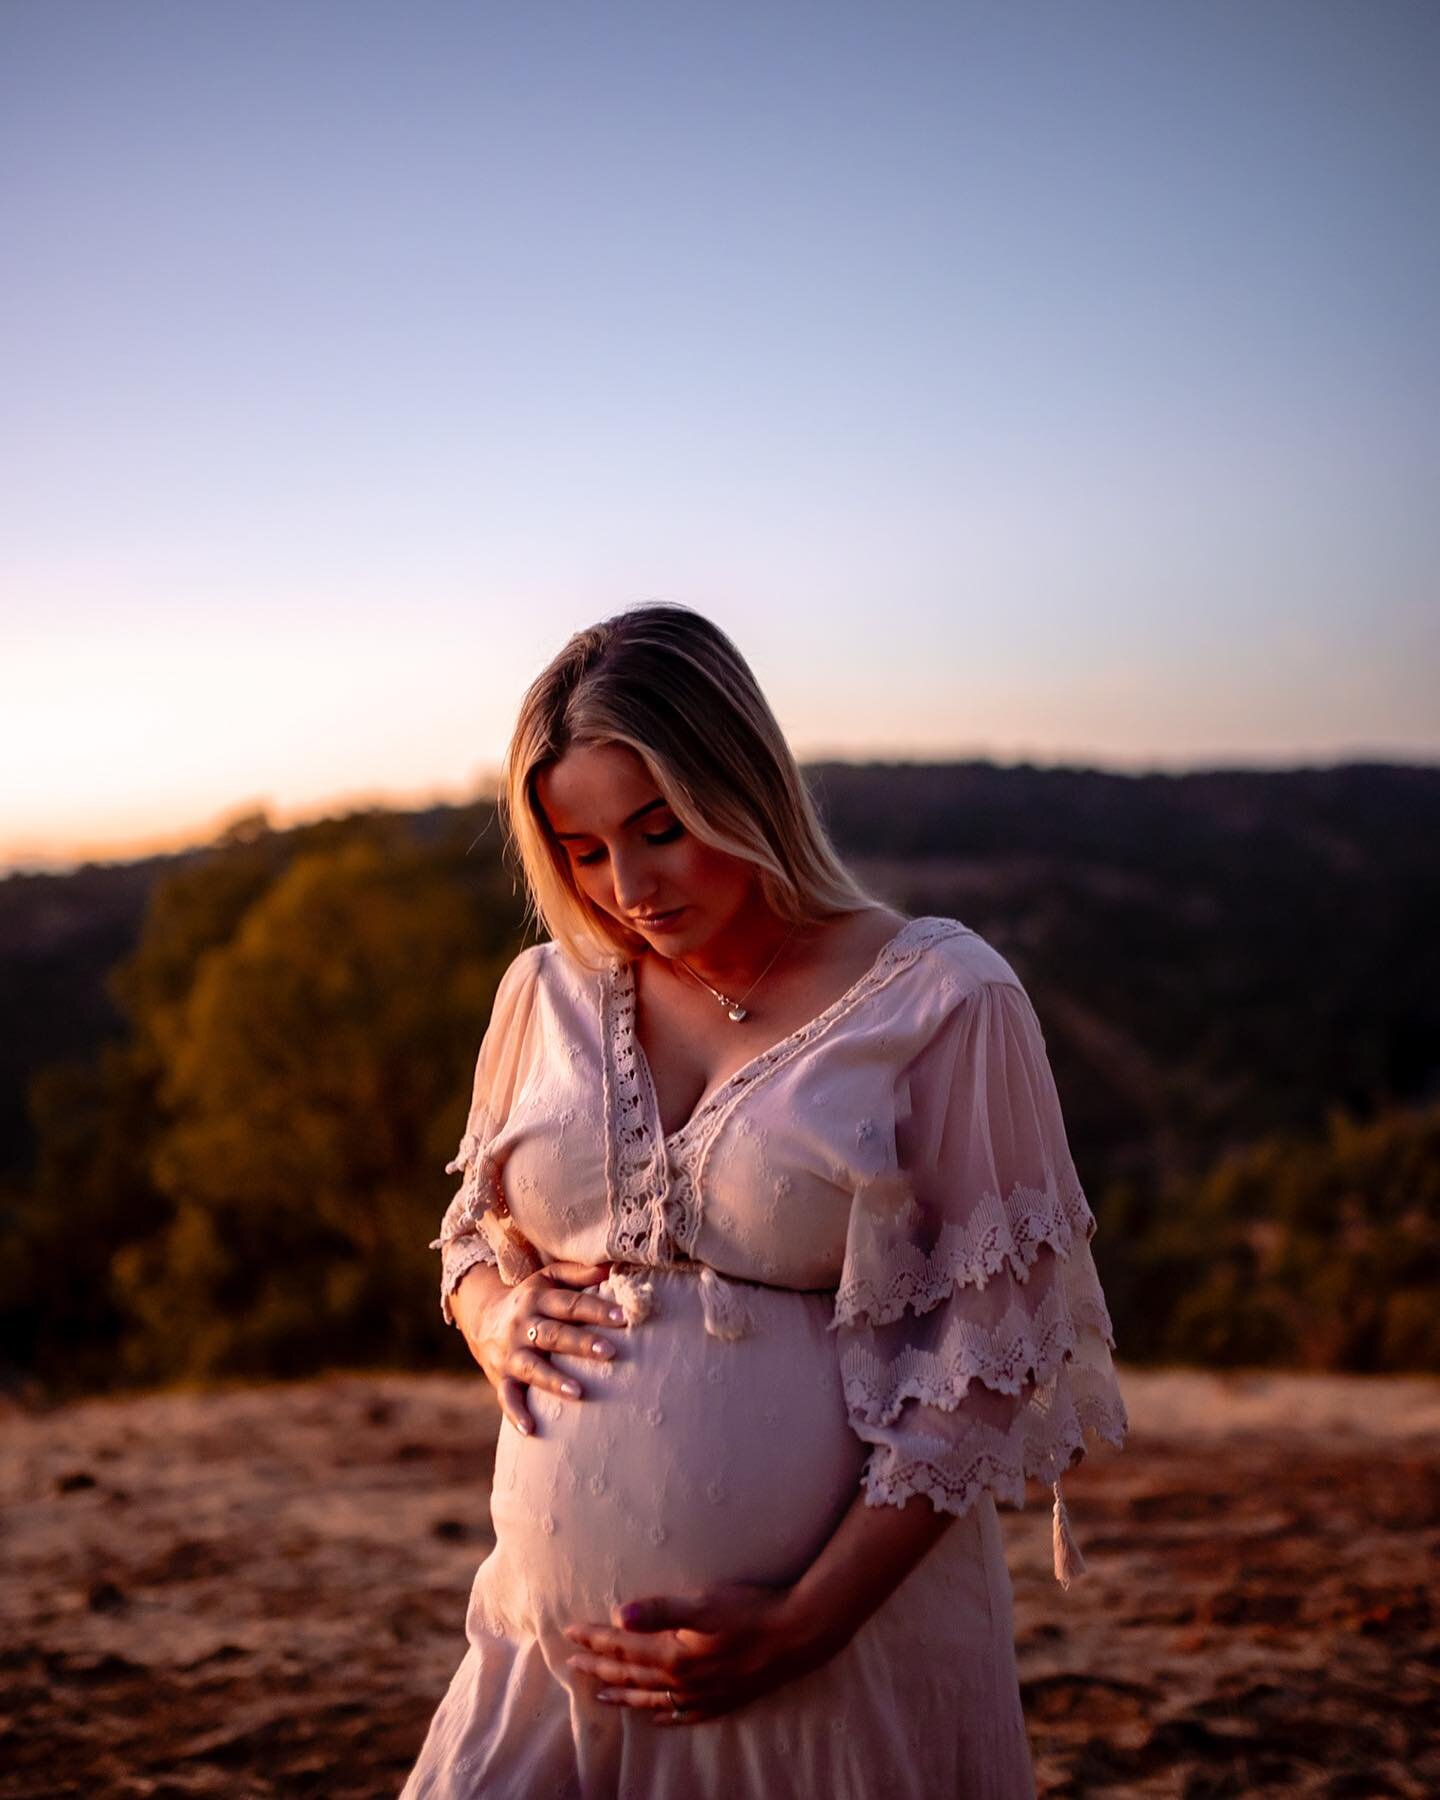 What better way to celebrate your bump 💕✨✨PerthMaternityPhotography #SunsetBumpPhotos #PerthSunsetSessions #MaternityMagic #BumpPhotographer #PregnancyGlow #PerthPregnancyPhotographer #BumpInTheSun #GoldenHourMaternity #ExpectingSunsets #PerthMomsTo